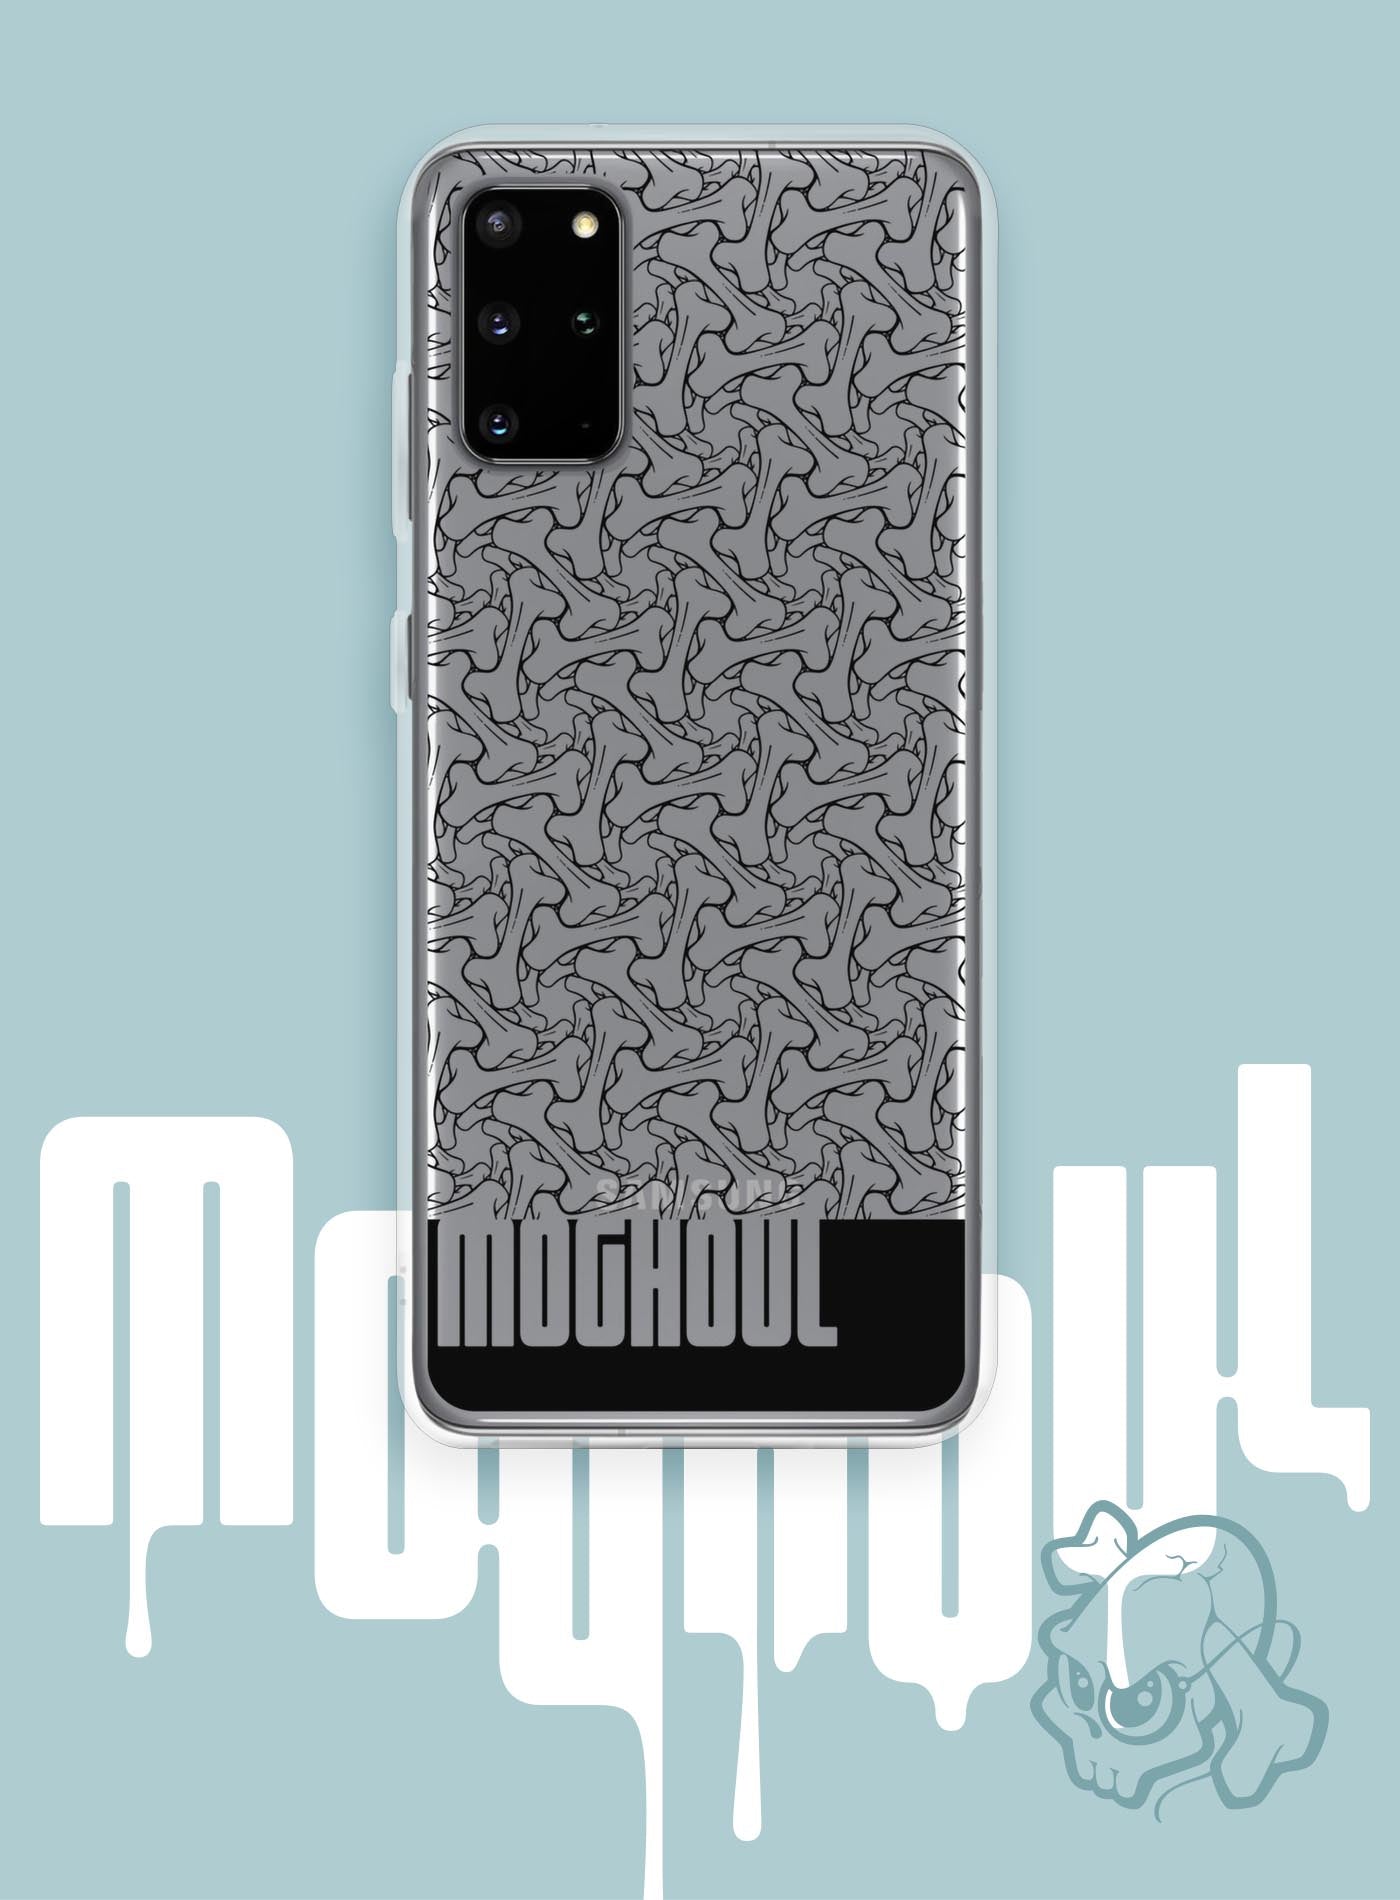 Samsung case featuring a patter of bones based on Islamic ornamental art in black color.